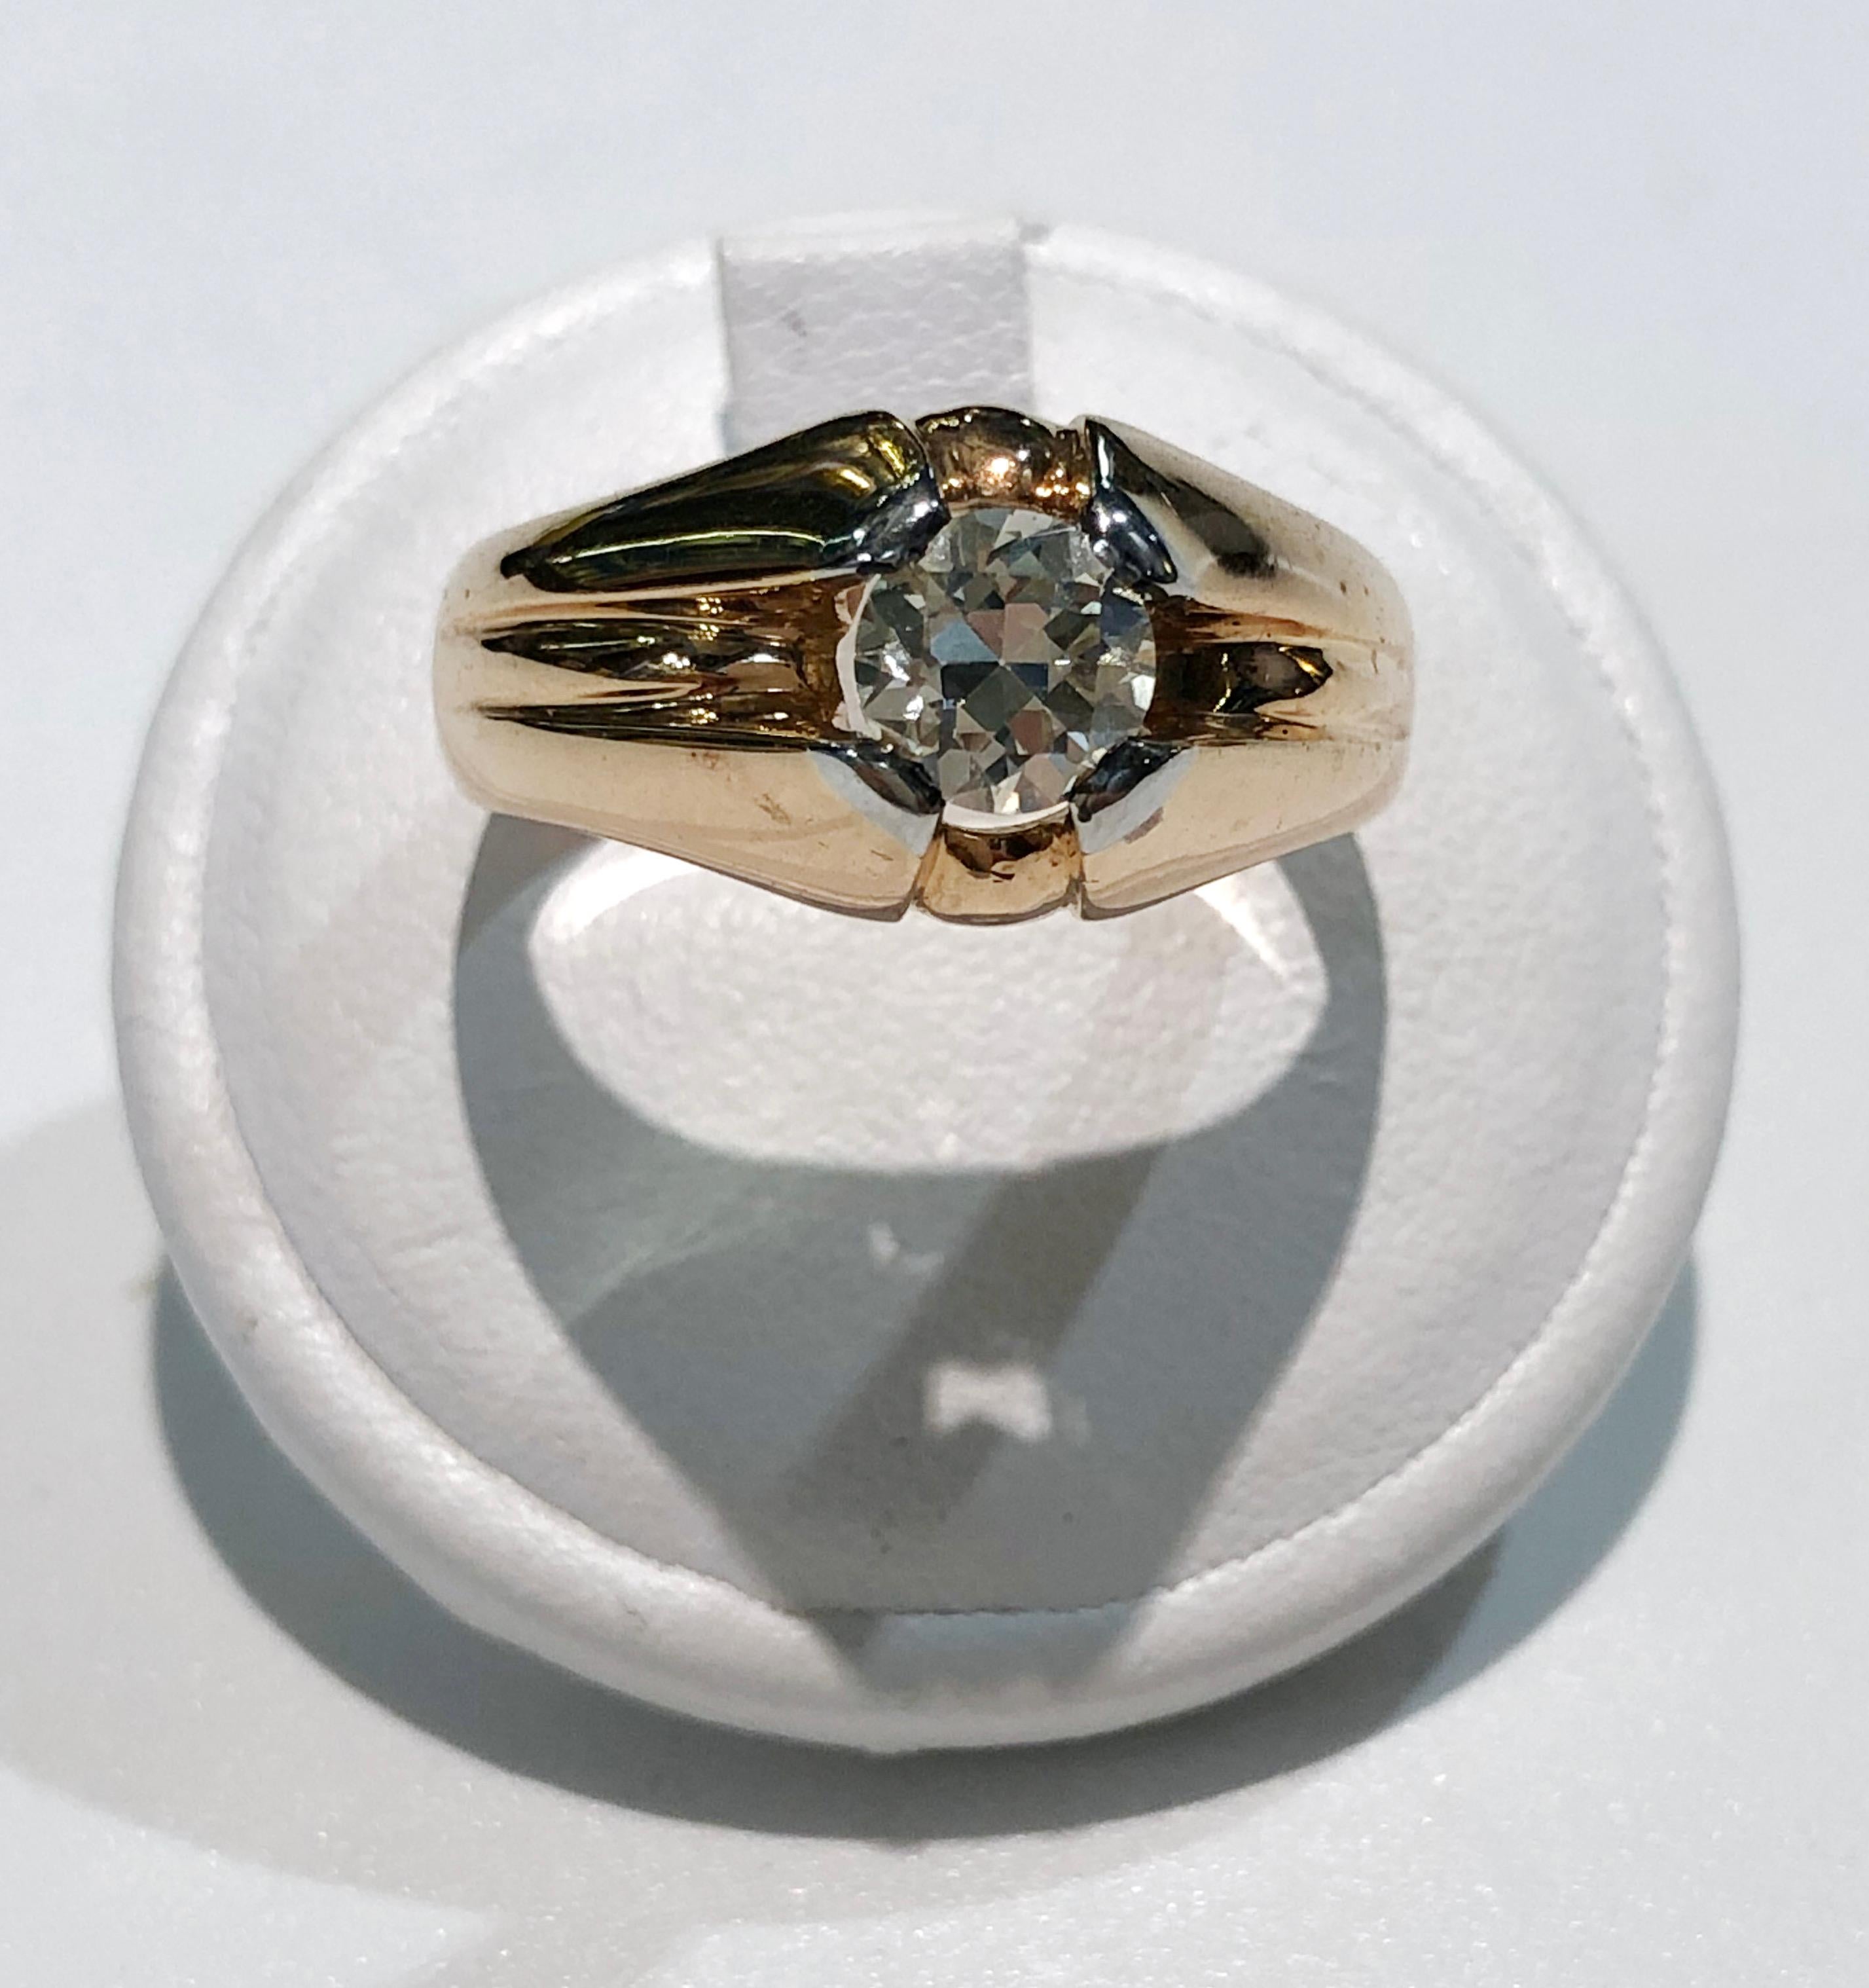 Vintage men's solitaire ring with 18 karat yellow gold band and a brilliant diamond of 0.7 karats, Italy 1950s
Ring size US 8